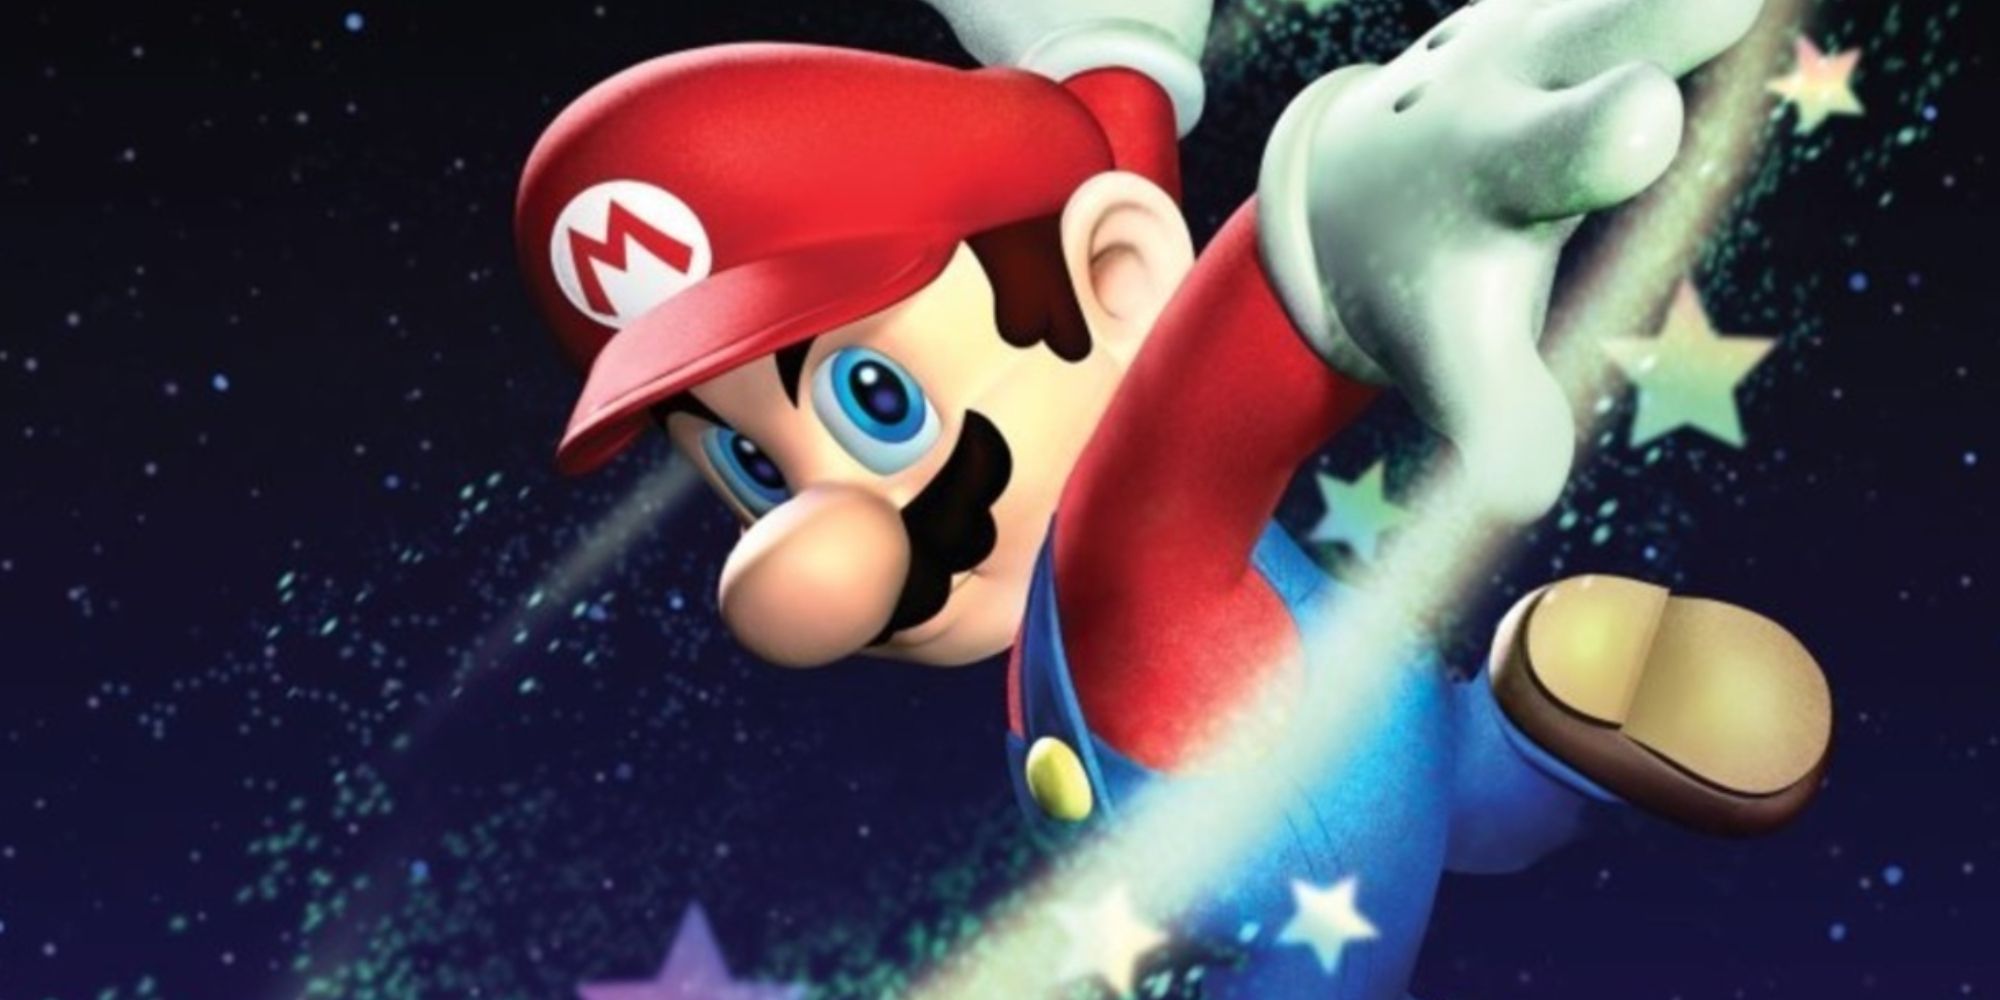 Mario spin jumping in space